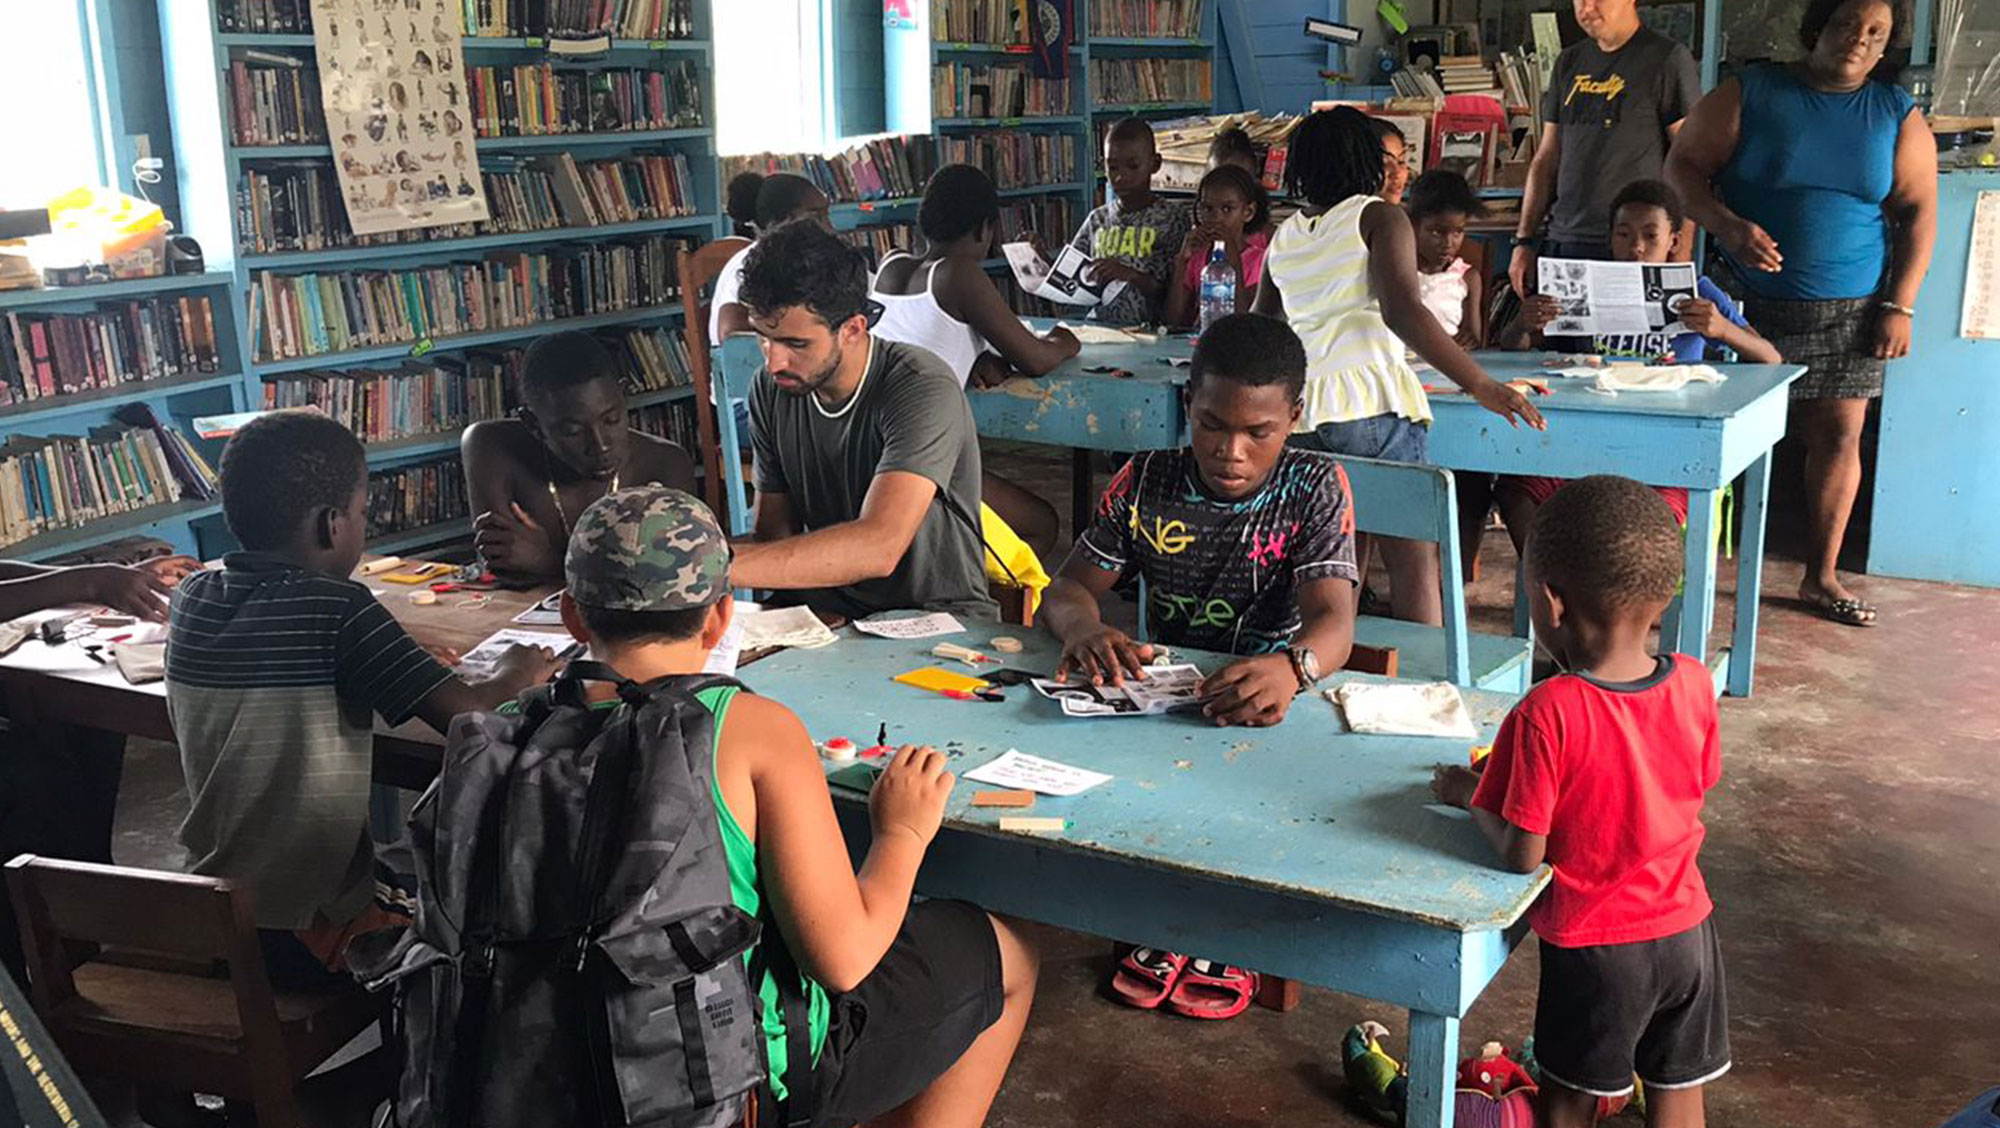 BHSU Senior Micah Ortiz teaches a class to students at a local library in Belize